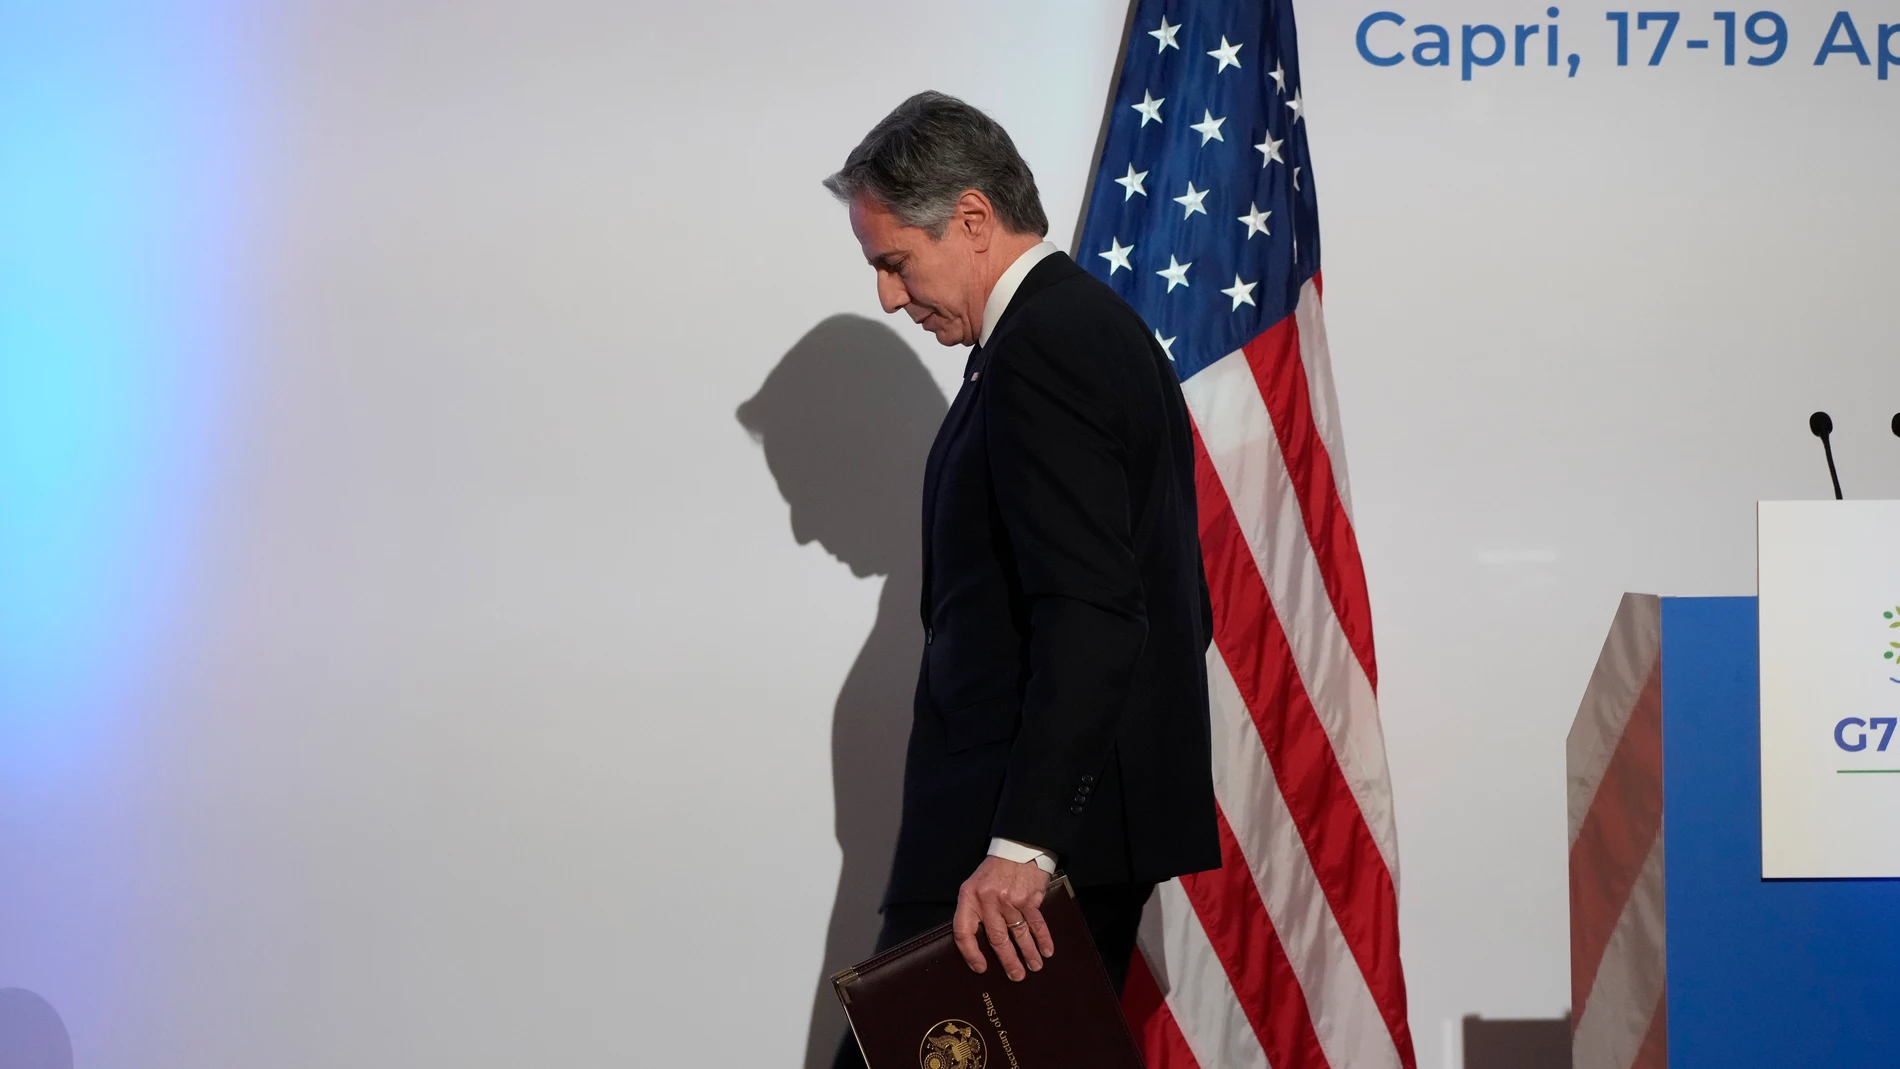 U.S. Secretary of State Antony Blinken leaves after meeting the journalists in a press conference at the G7 Foreign Ministers meeting on Capri Island, Italy, Friday, April 19, 2024. (AP Photo/Gregorio Borgia)